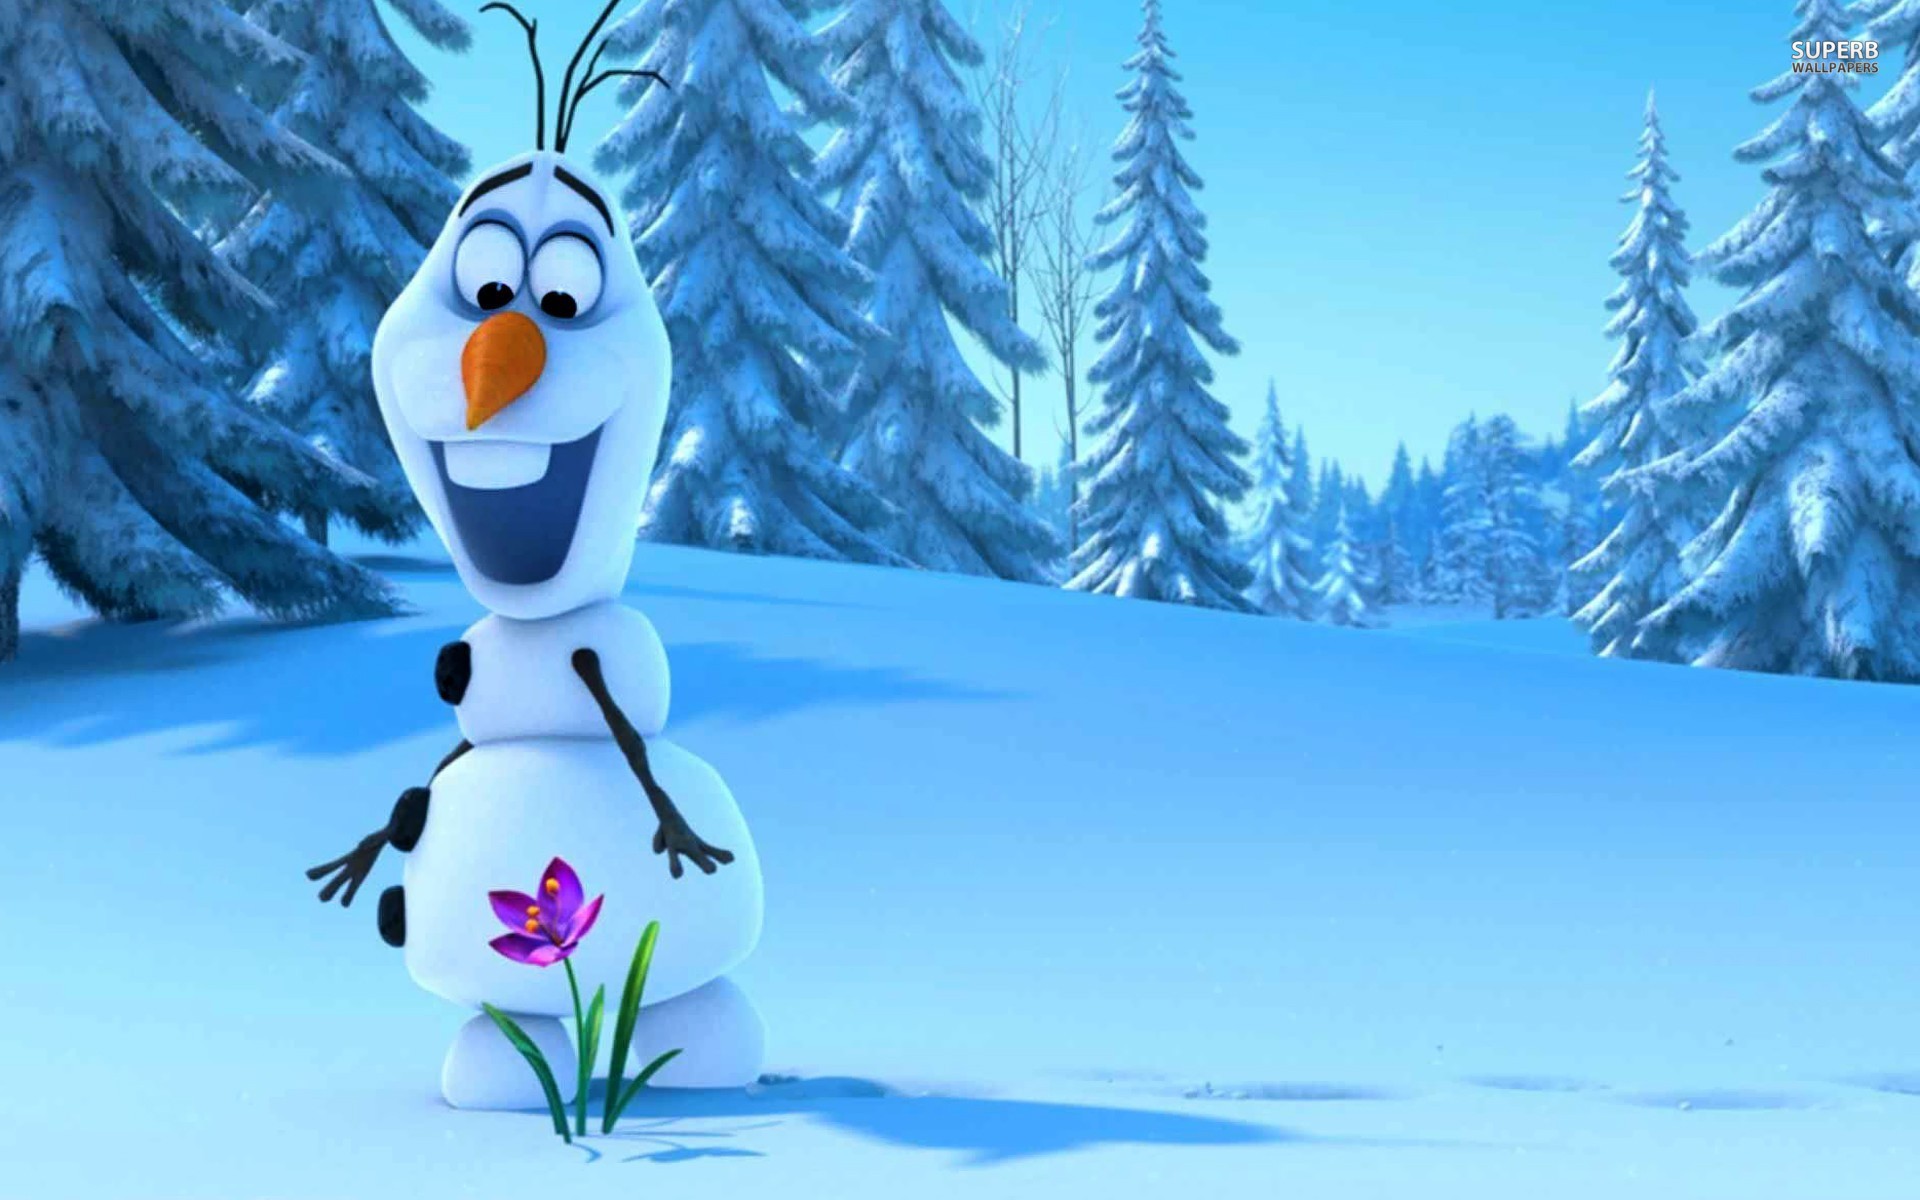 Frozen Olaf Wallpapers And Images   Wallpapers Pictures Photos